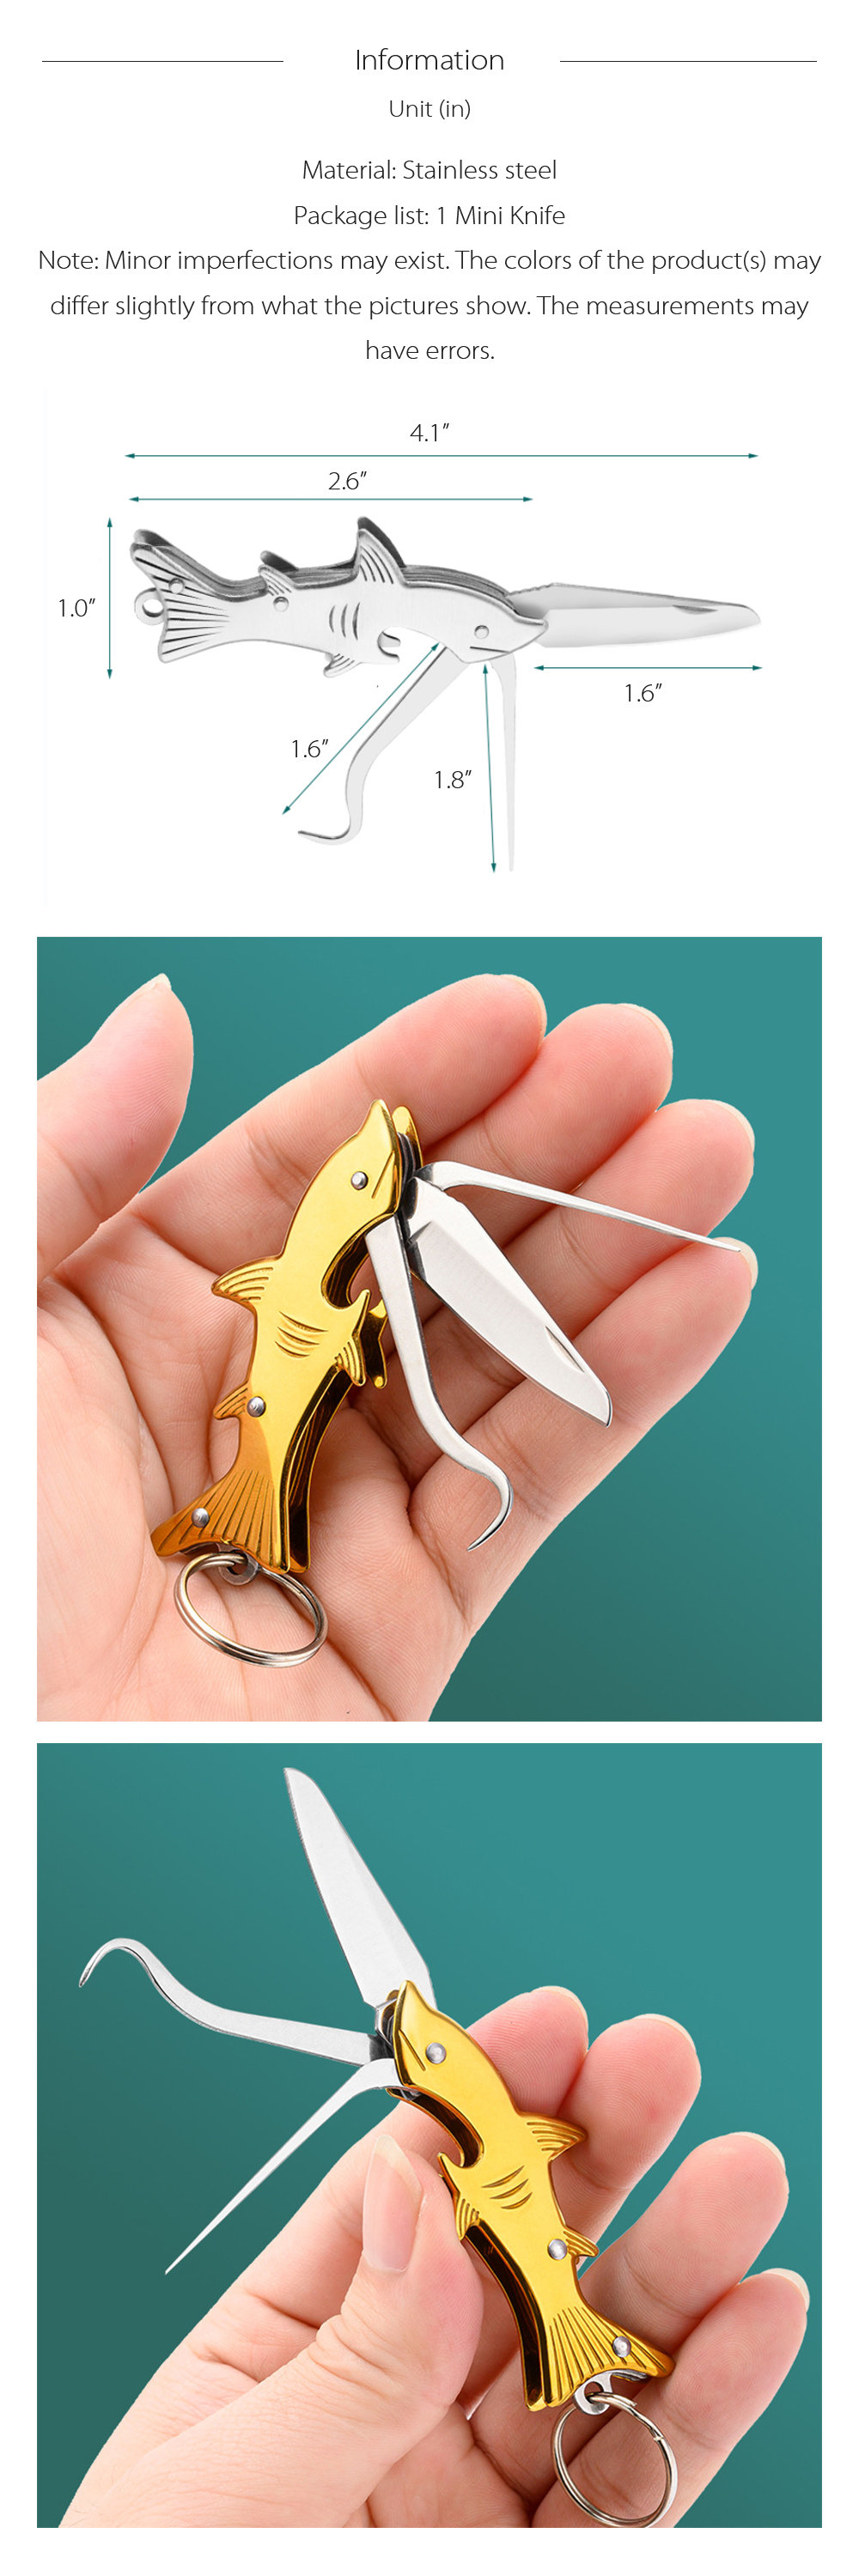 Fish Shaped Mini Knife - Stainless Steel - Yellow - Portable